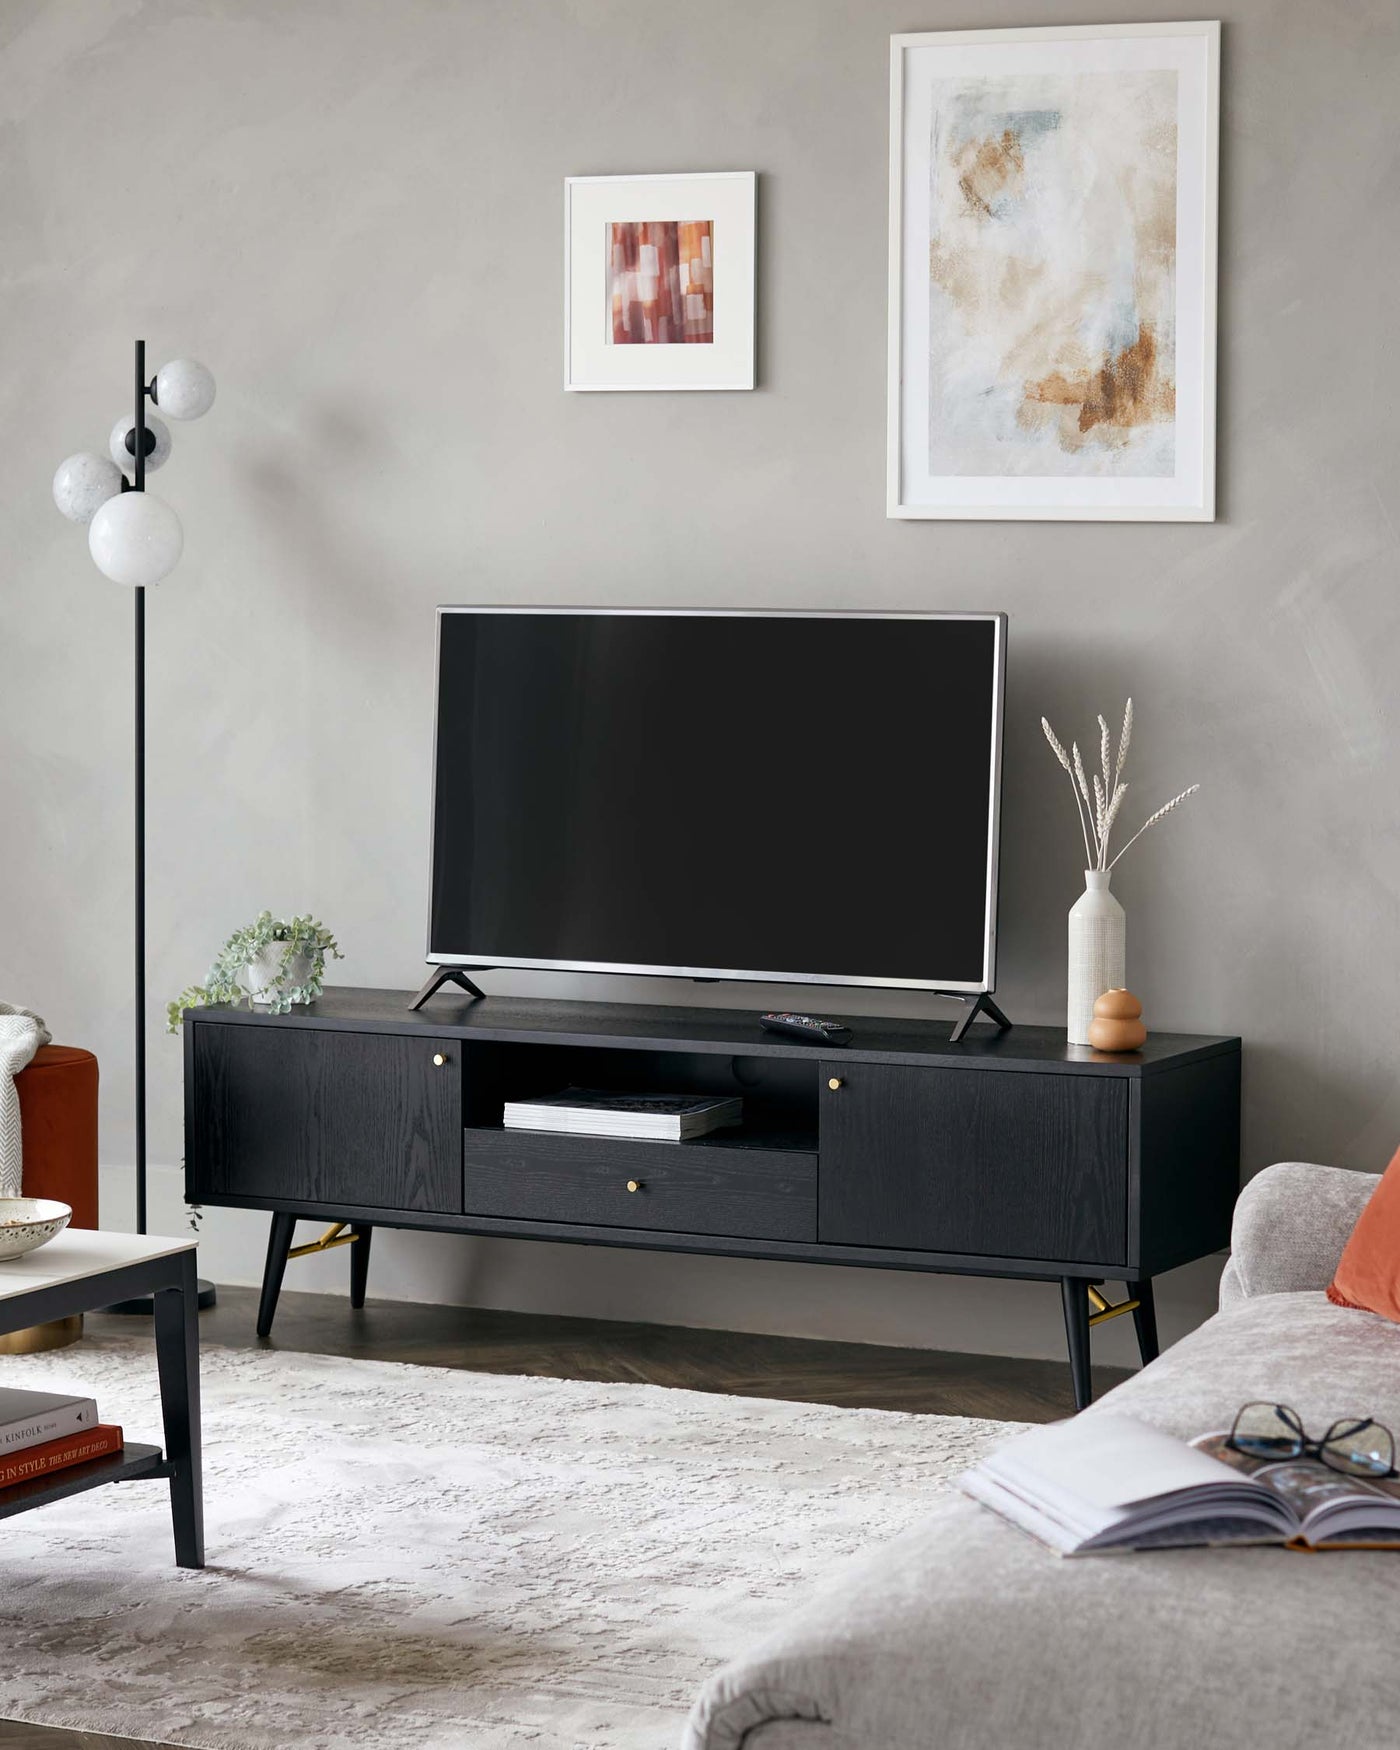 A contemporary black TV stand with clean lines, featuring open shelving and closed compartments for storage, stands on slender metal legs. In the foreground, a portion of a light grey fabric sofa with a tufted cushion is visible, accompanied by a small round side table with a white top and wood legs. The scene is completed with an accent floor lamp that has a slender pole and three spherical shades.